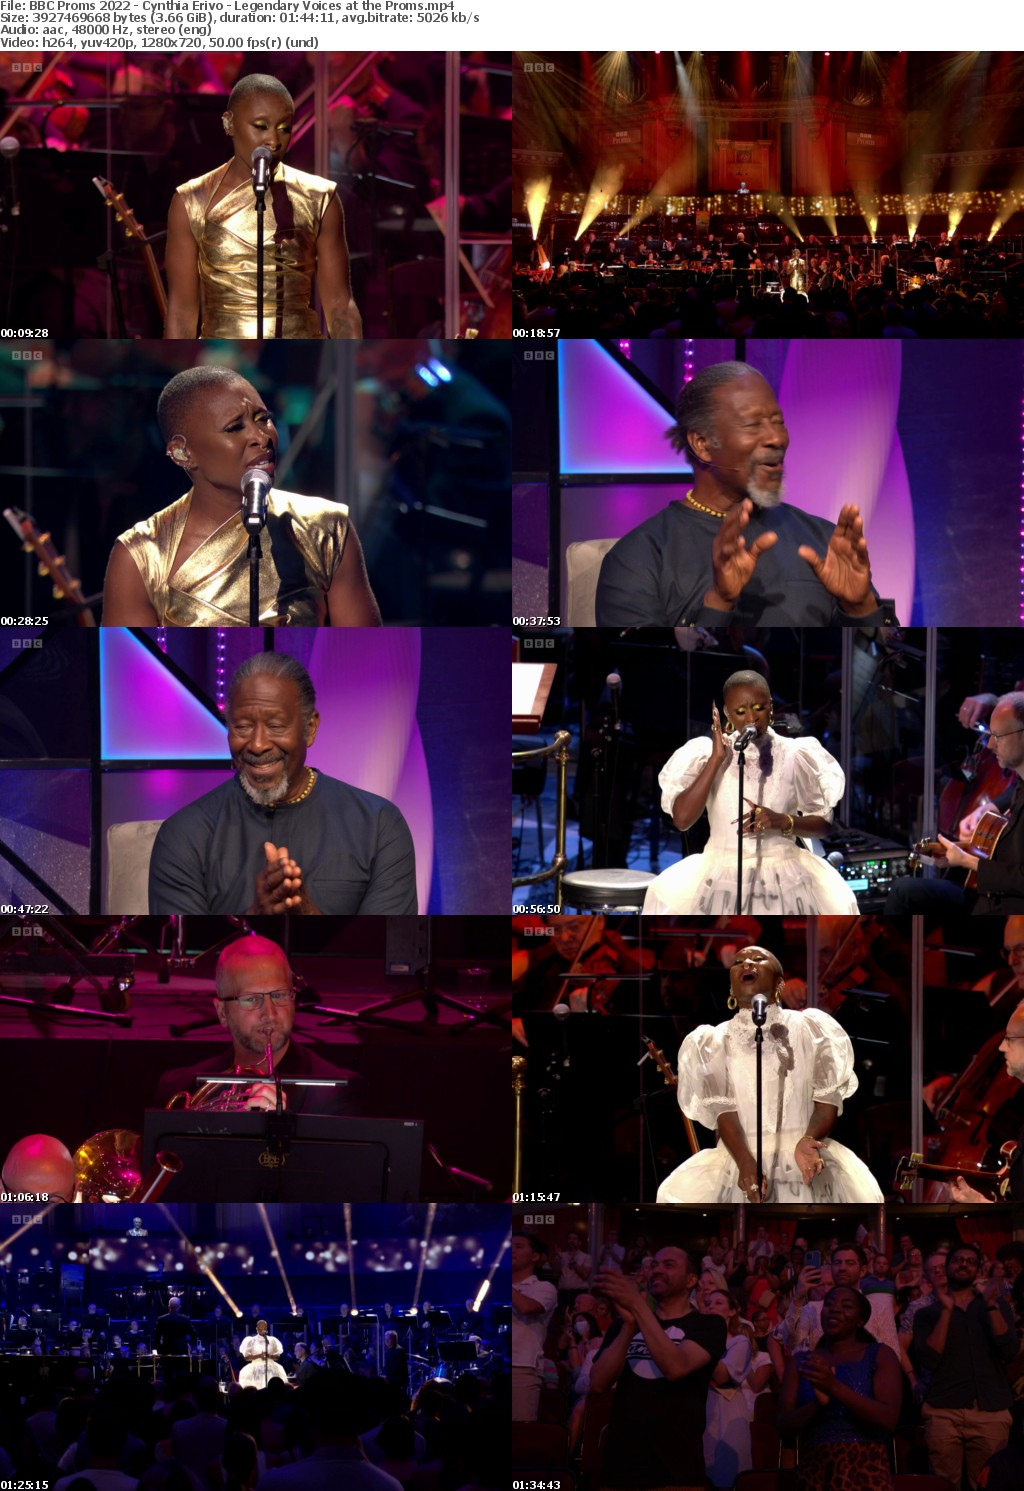 BBC Proms 2022 - Cynthia Erivo - Legendary Voices at the Proms (1280x720p HD, 50fps, soft Eng subs)